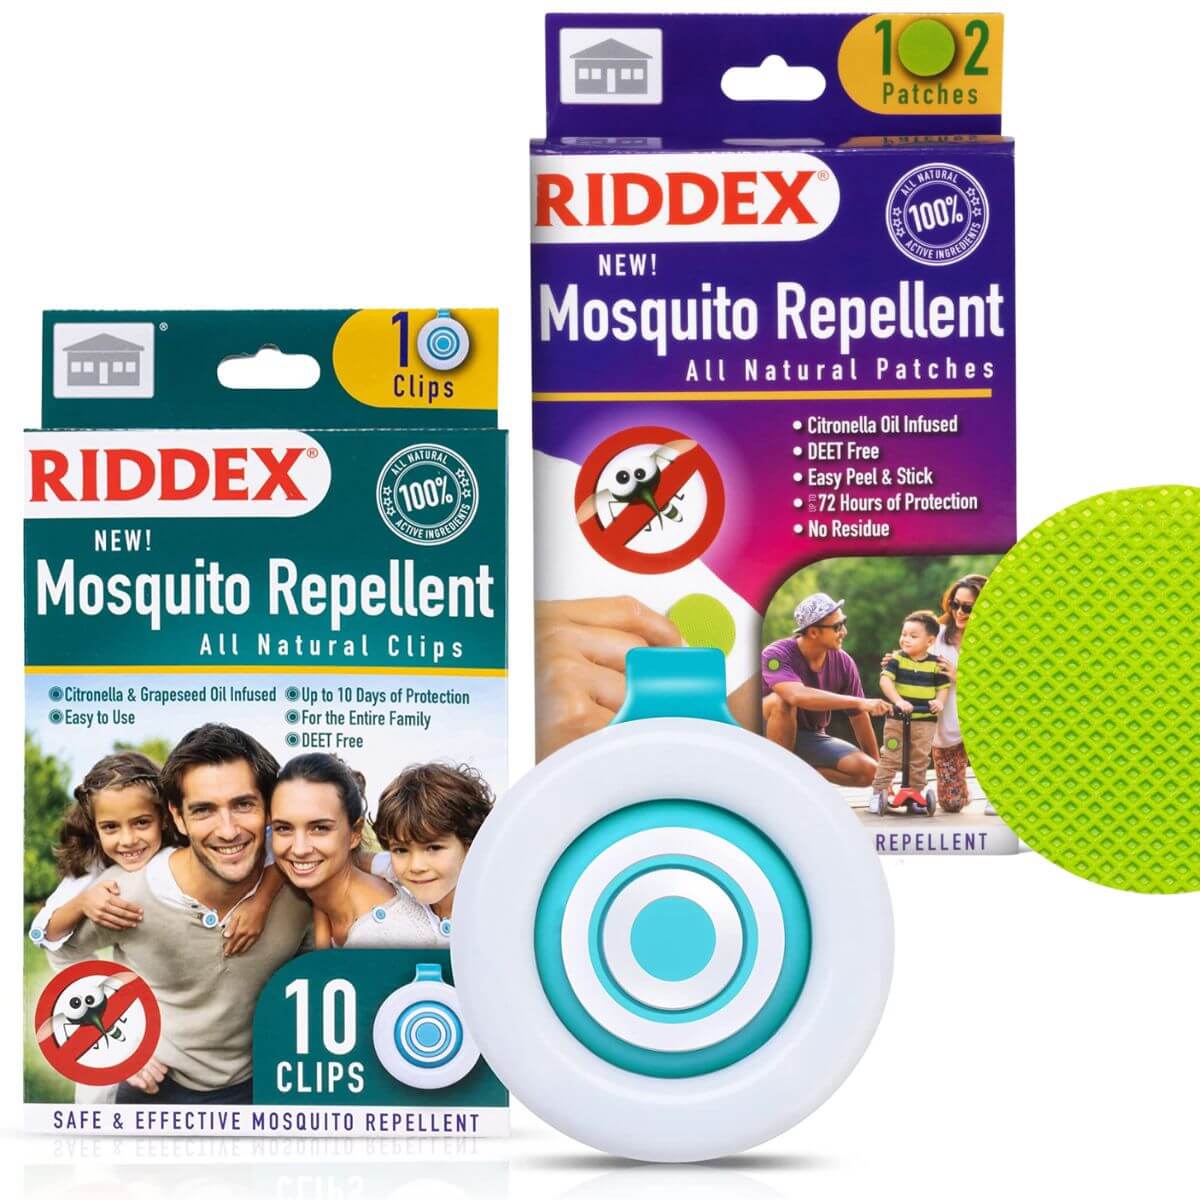 Riddex Mosquito Repellent - 10 Clip + 102 Patches bundle photo of boxes, clip and patch